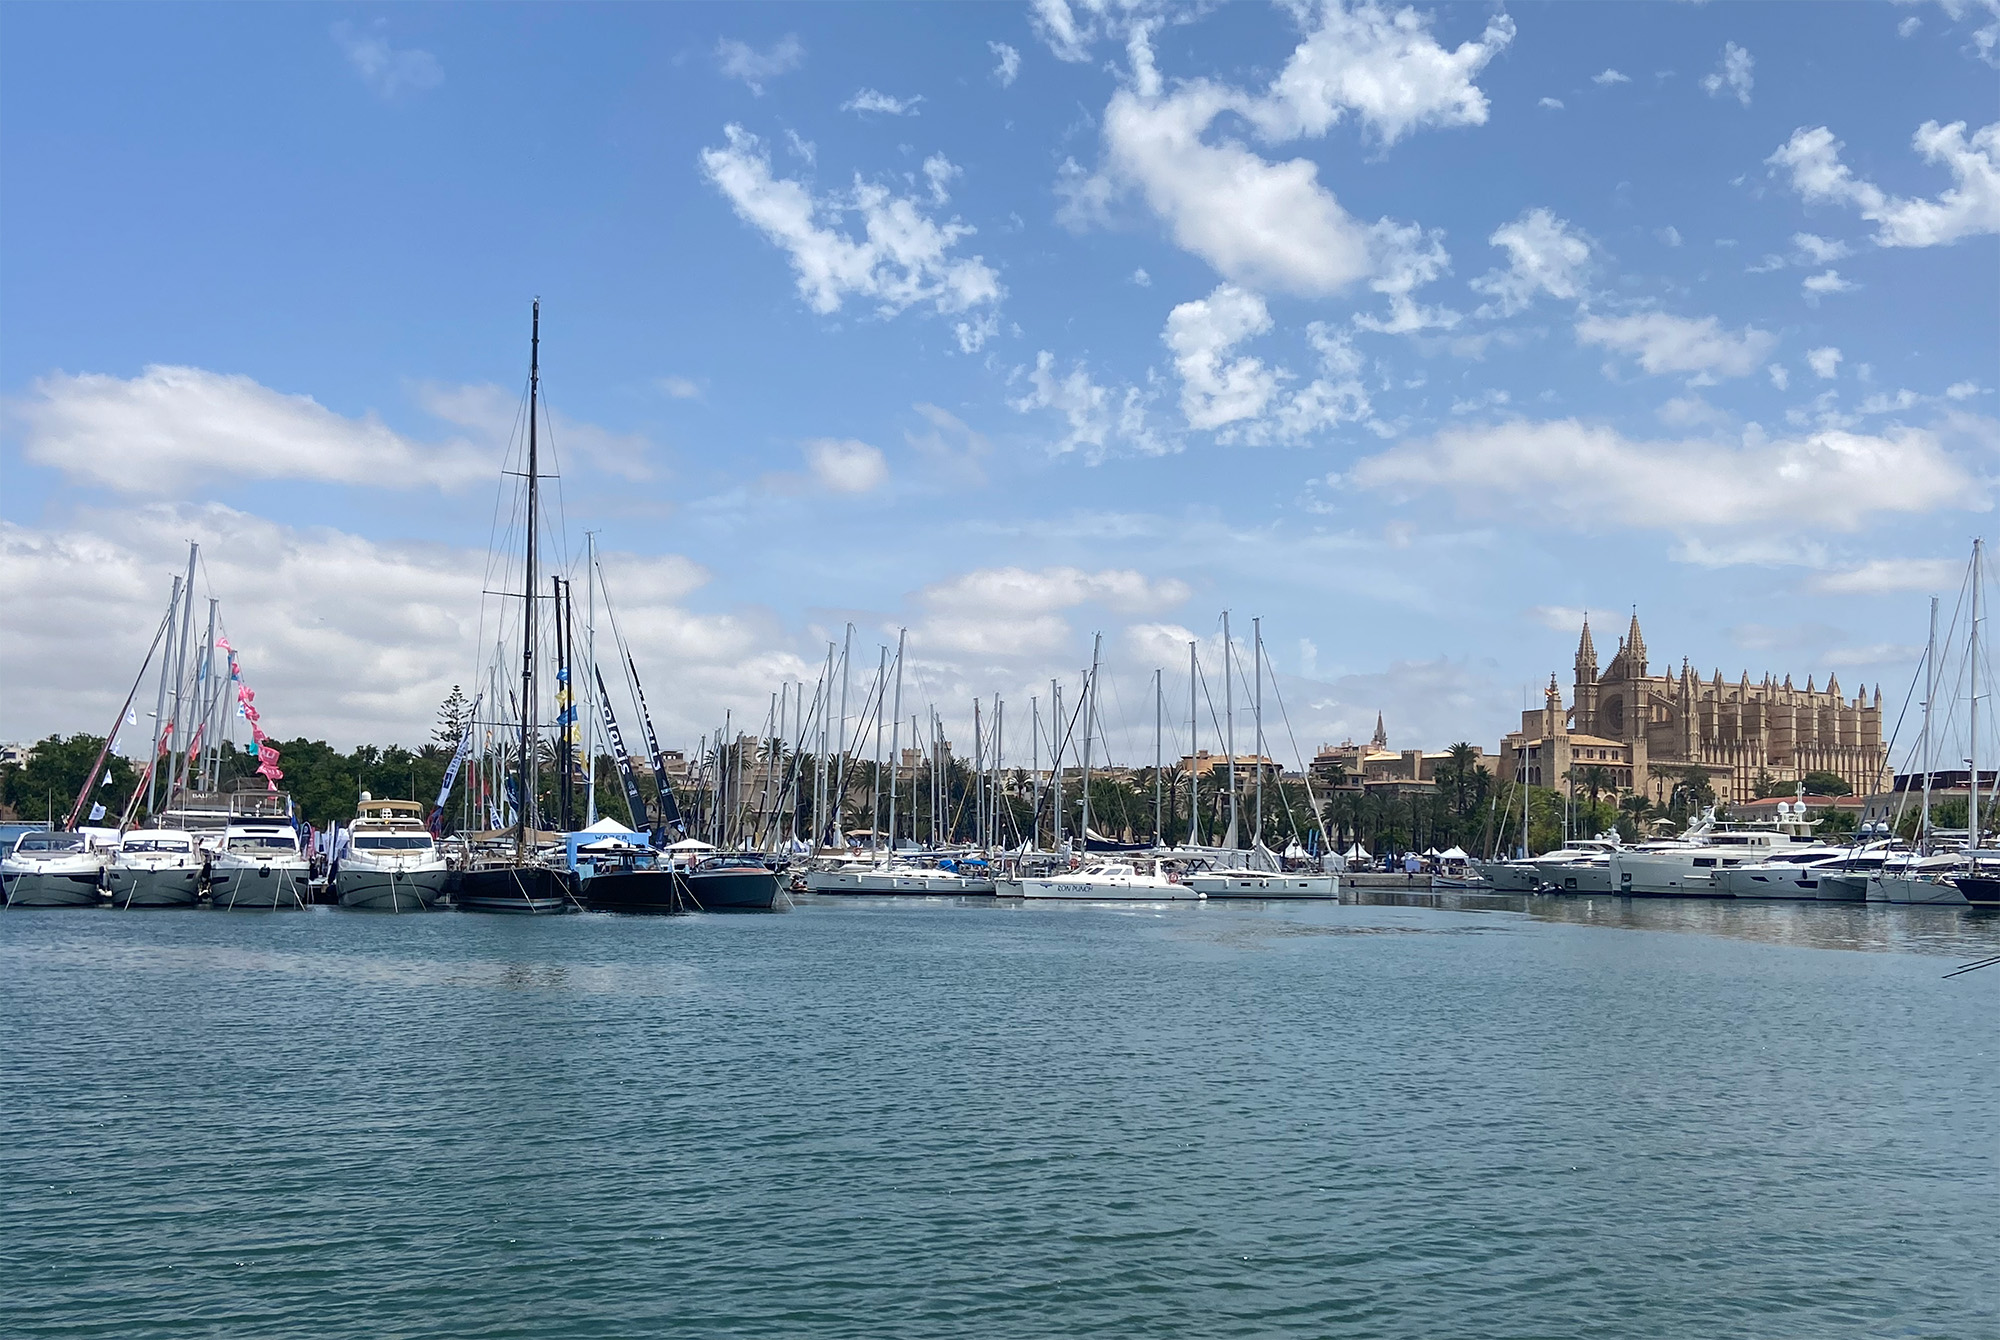 “Made in Germany” in the Palma Superyacht Village